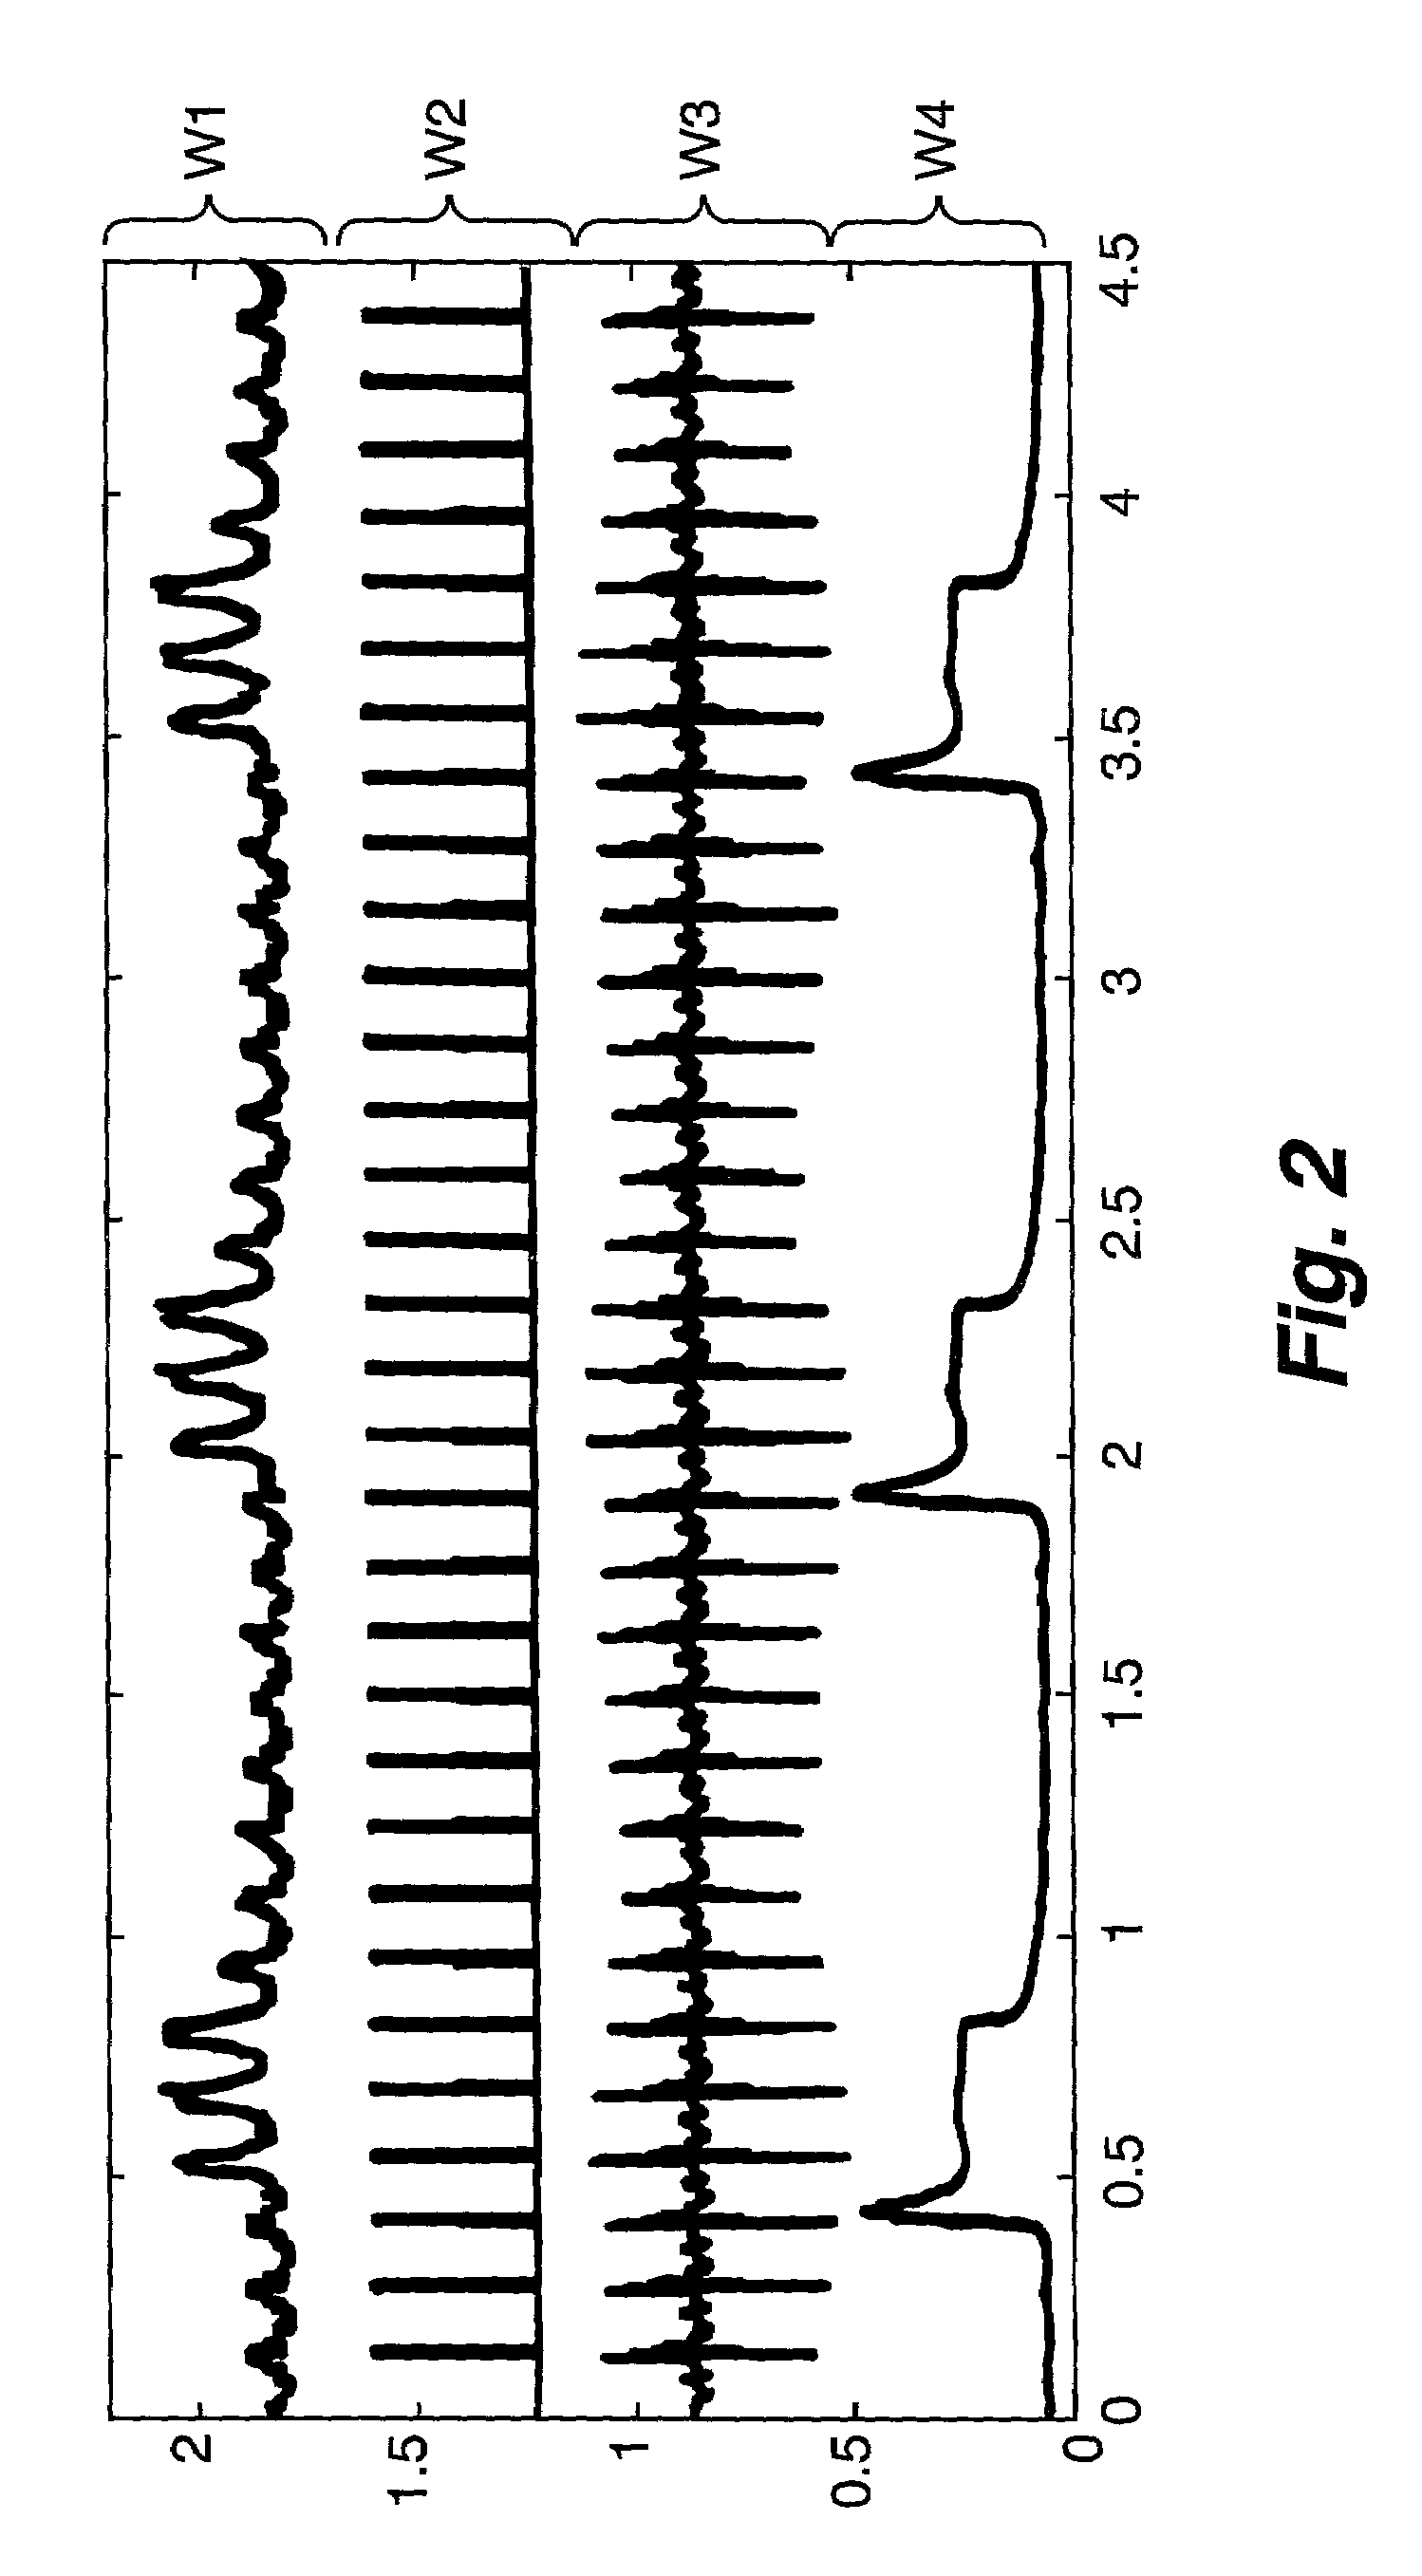 MR-compatible methods and systems for cardiac monitoring and gating